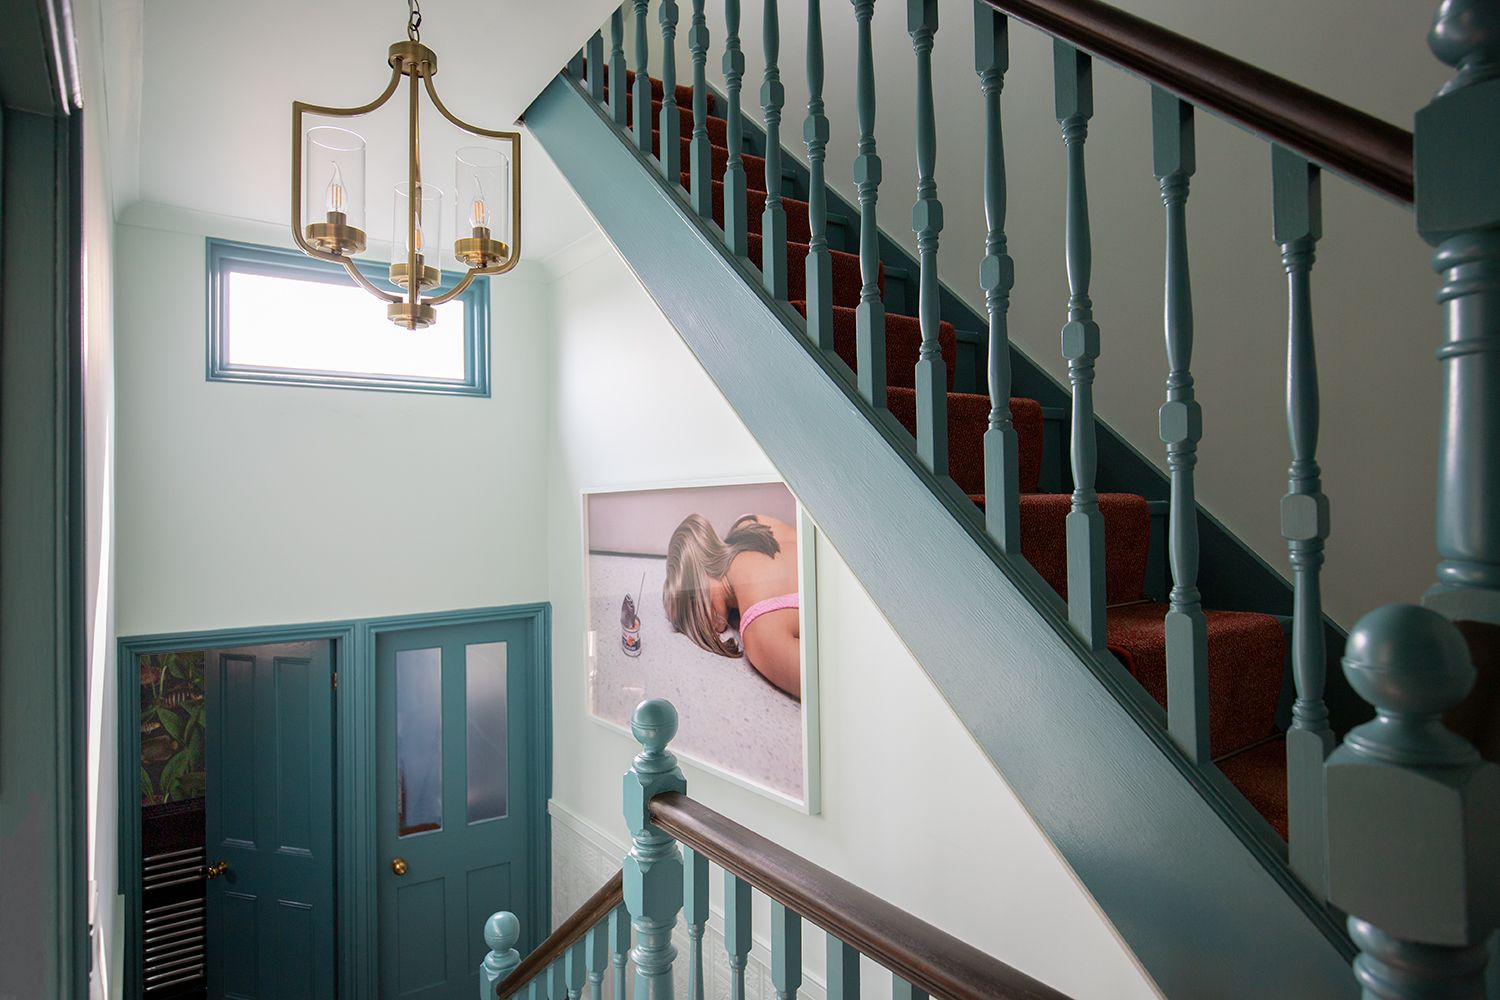 A photo of the first floor landing with teal painted bannisters and brass lighting and door furniture.